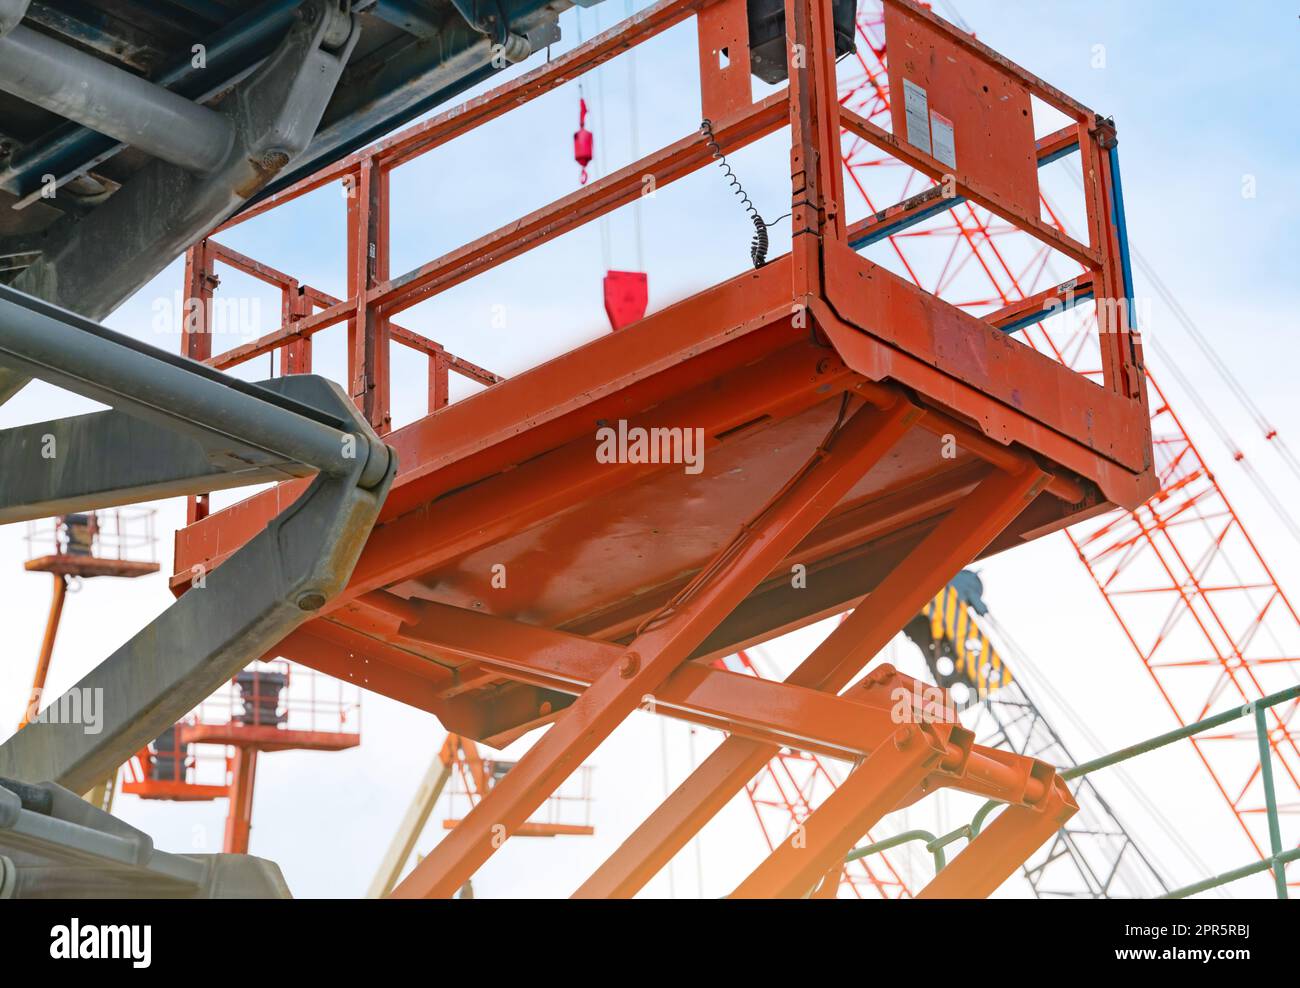 Articulated boom lift. Aerial platform lift. Telescopic boom lift against blue sky. Mobile construction crane for rent and sale. Maintenance and repair hydraulic boom lift service. Crane dealership. Stock Photo